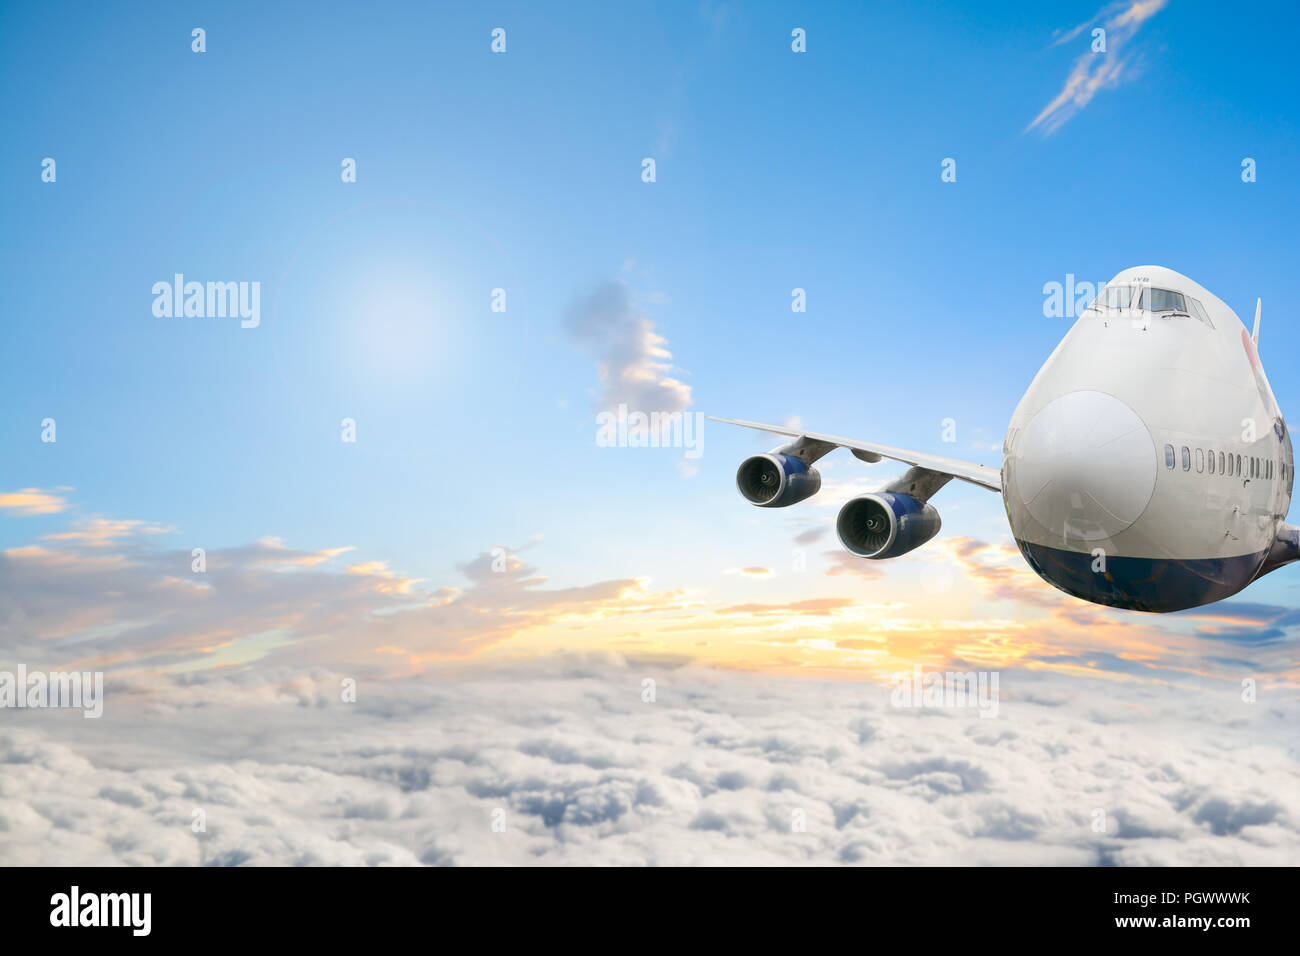 Commercial passenger jet plane flying high above clouds Stock Photo